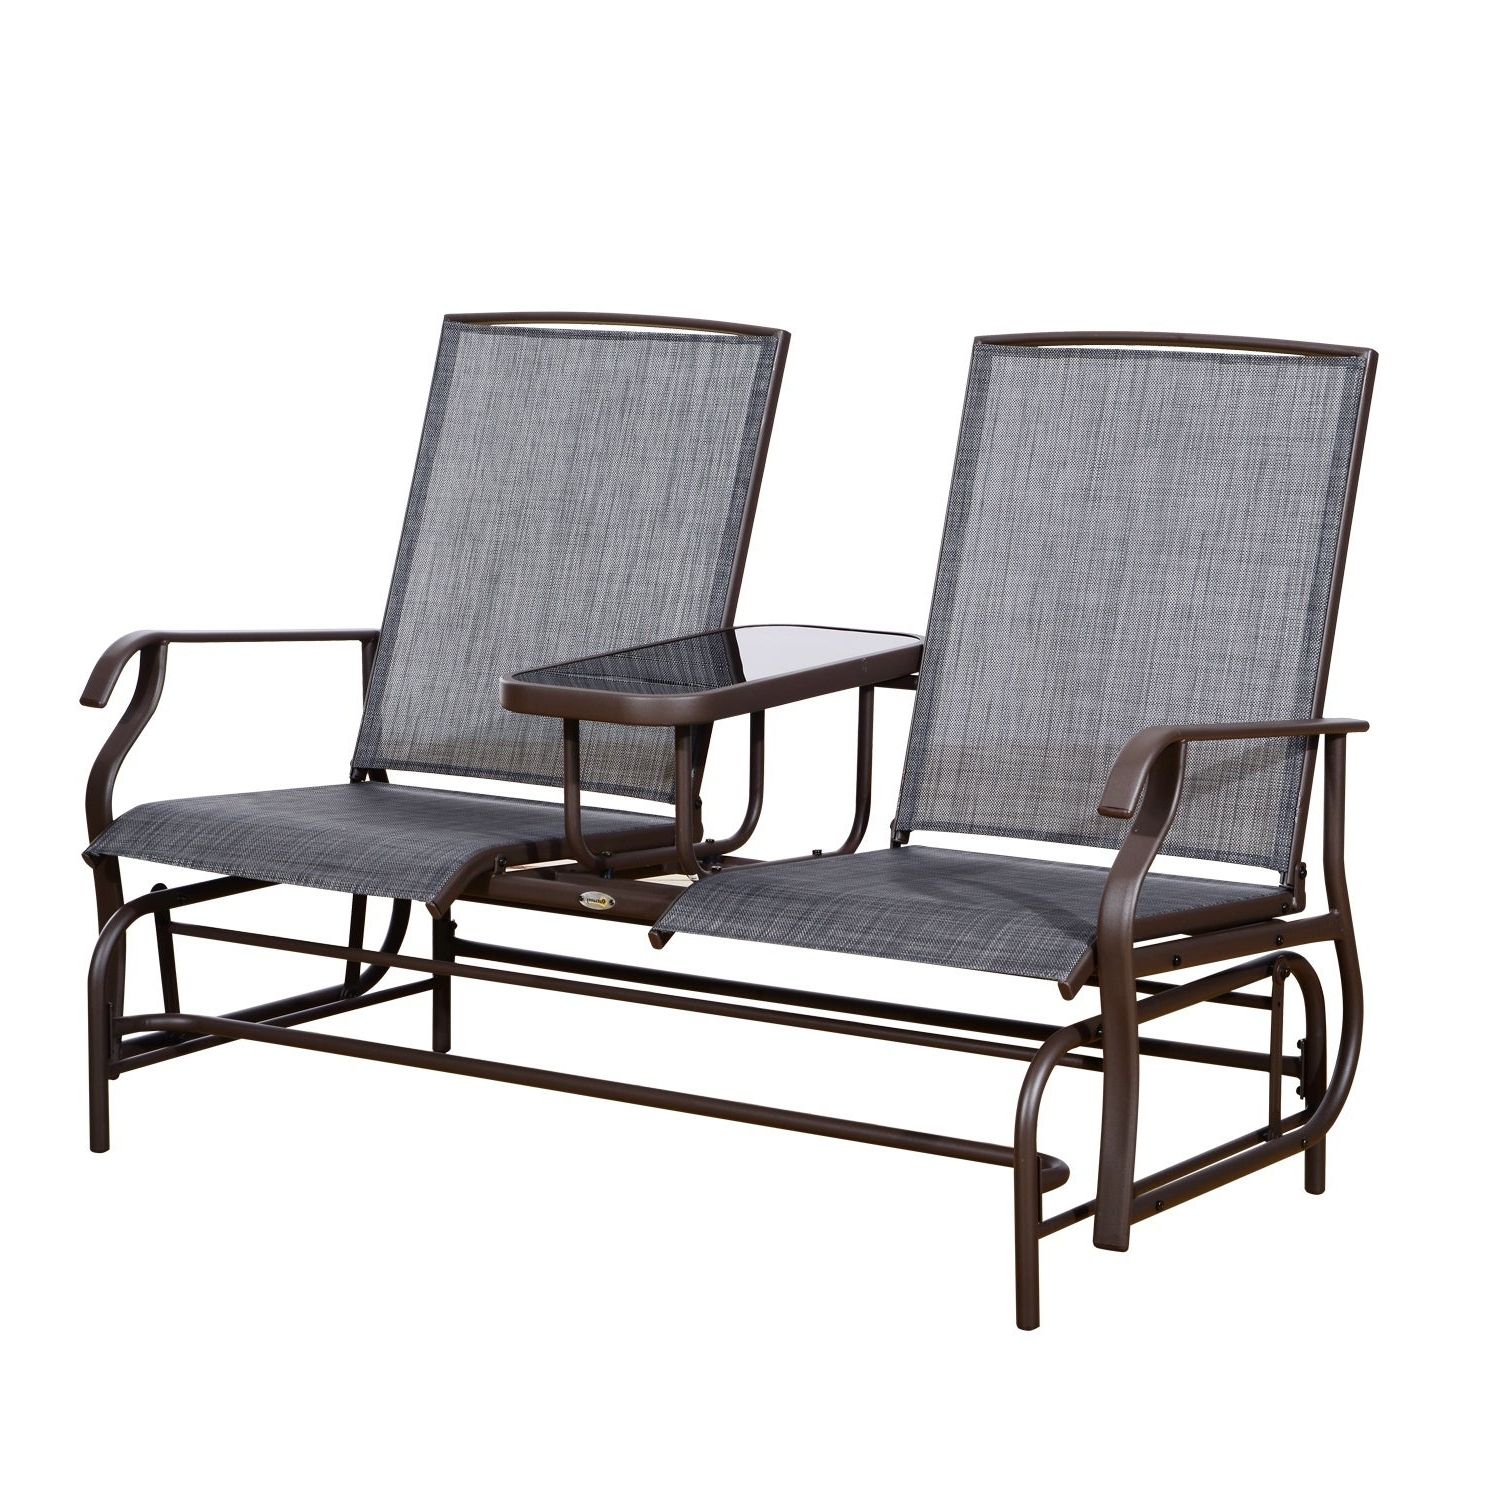 Outsunny Two Person Outdoor Mesh Fabric Patio Double Glider Chair With  Center Table Intended For Famous 2 Person Antique Black Iron Outdoor Gliders (View 23 of 30)